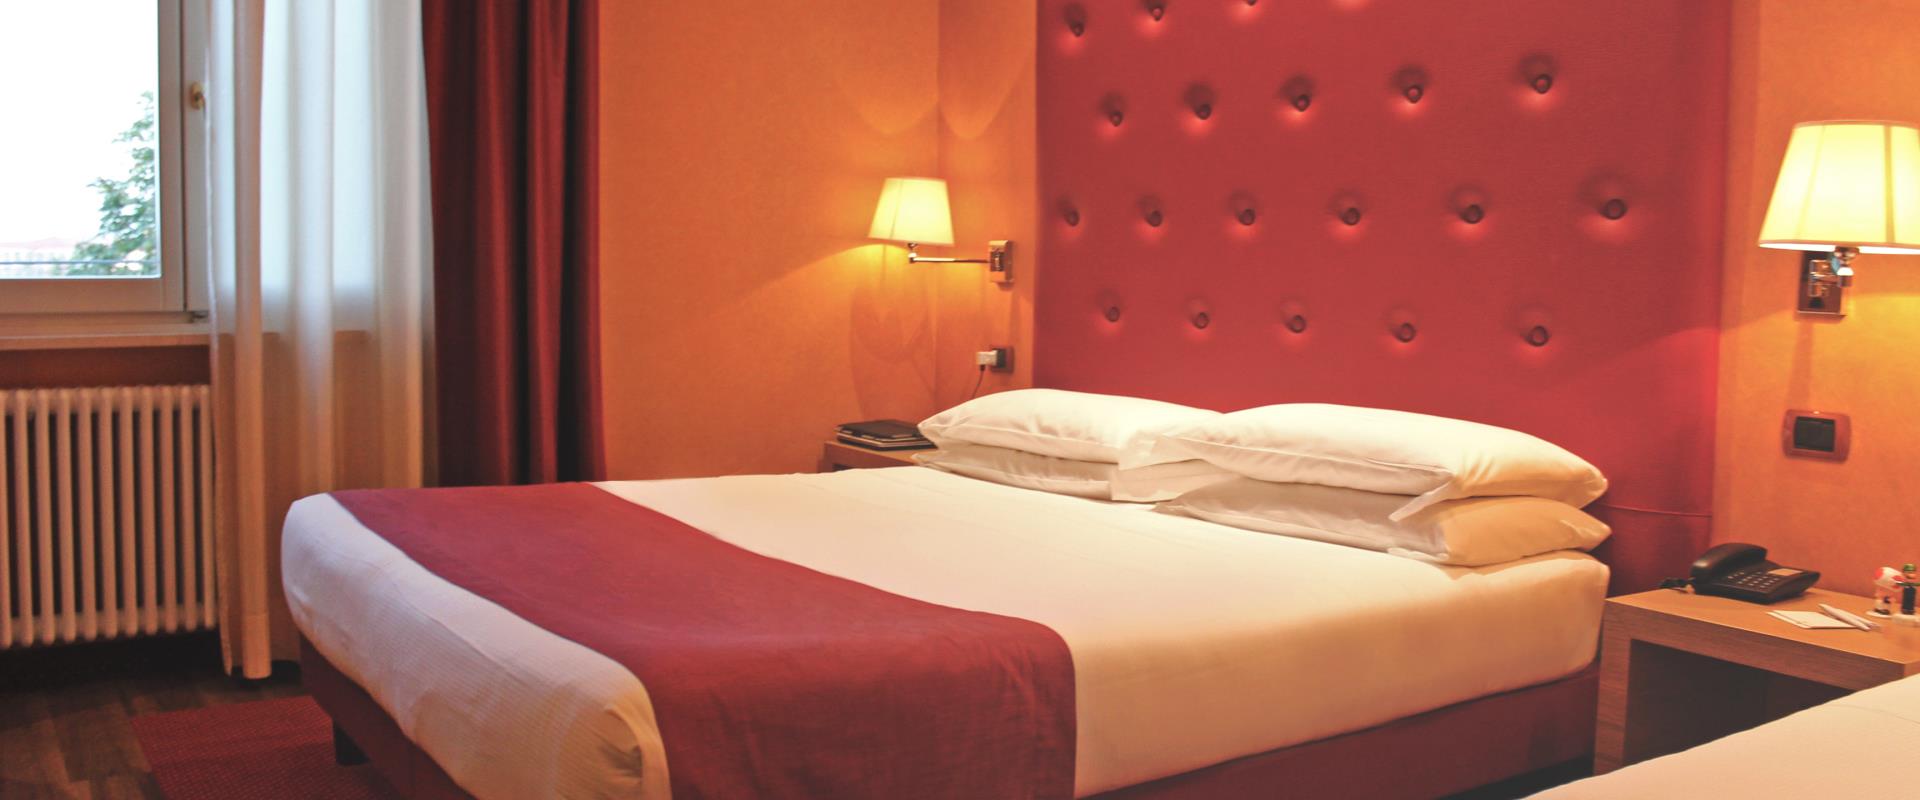 Check out the 4 star amenities at the Best Western Hotel Piemontese Bergamo!